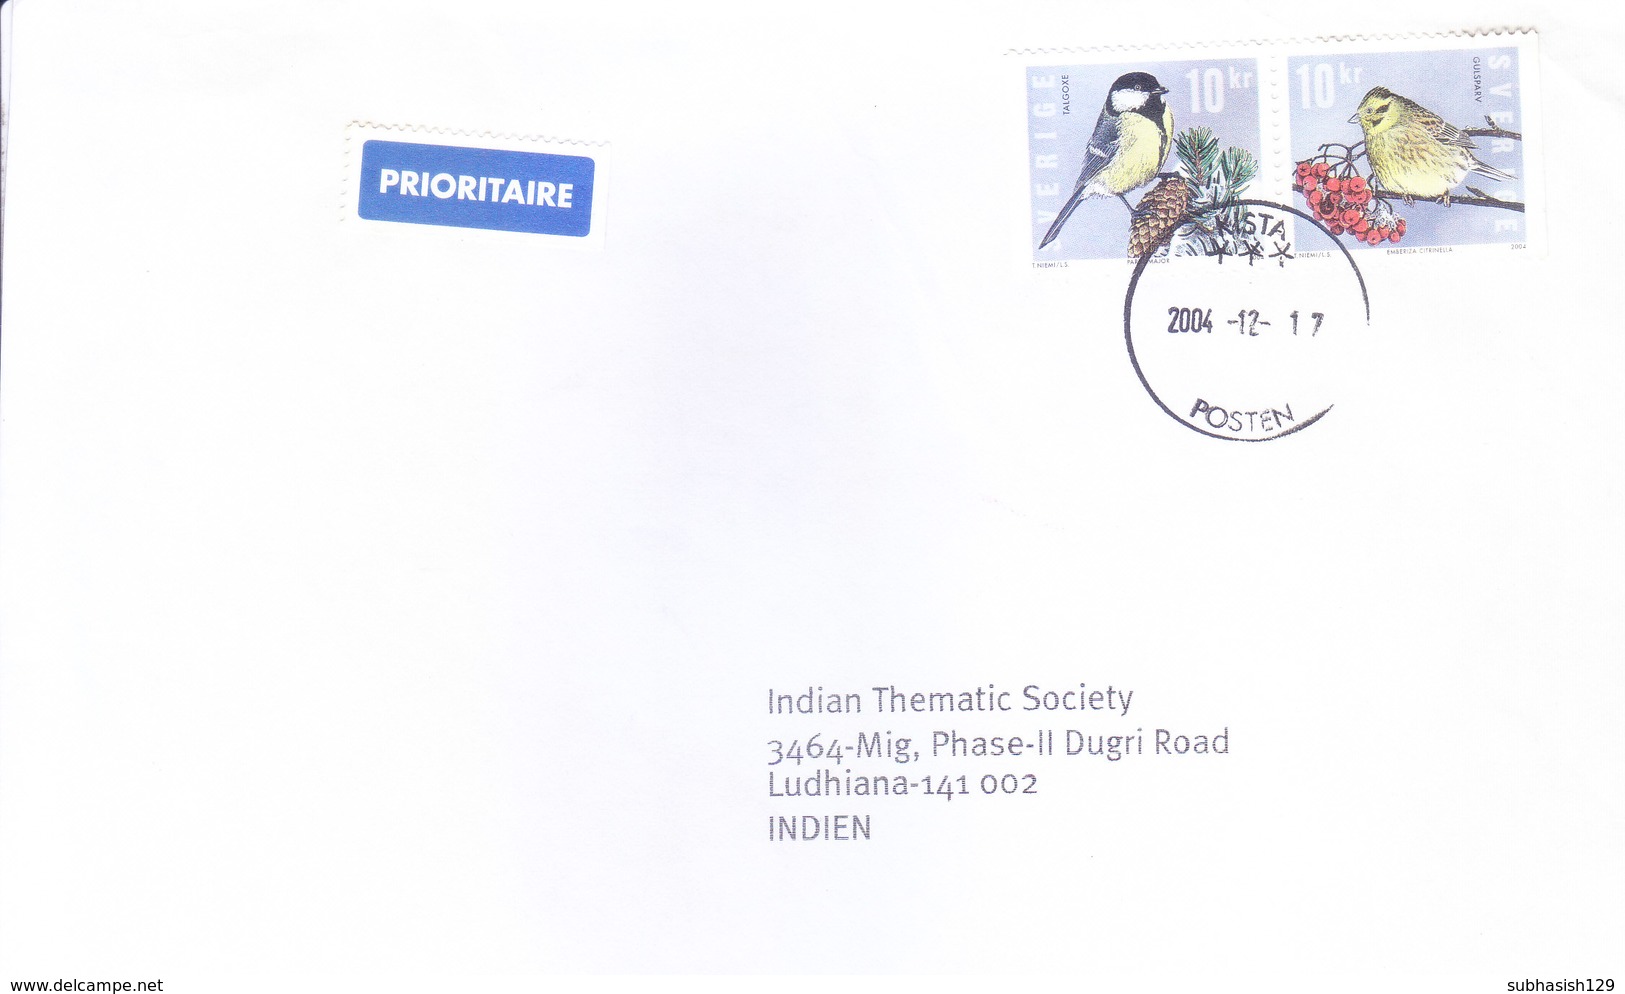 SWEDEN 2004 COMMERCIAL COVER POSTED FROM KISTA FOR INDIA - 2V STRIP OF BIRD STAMP - Lettres & Documents